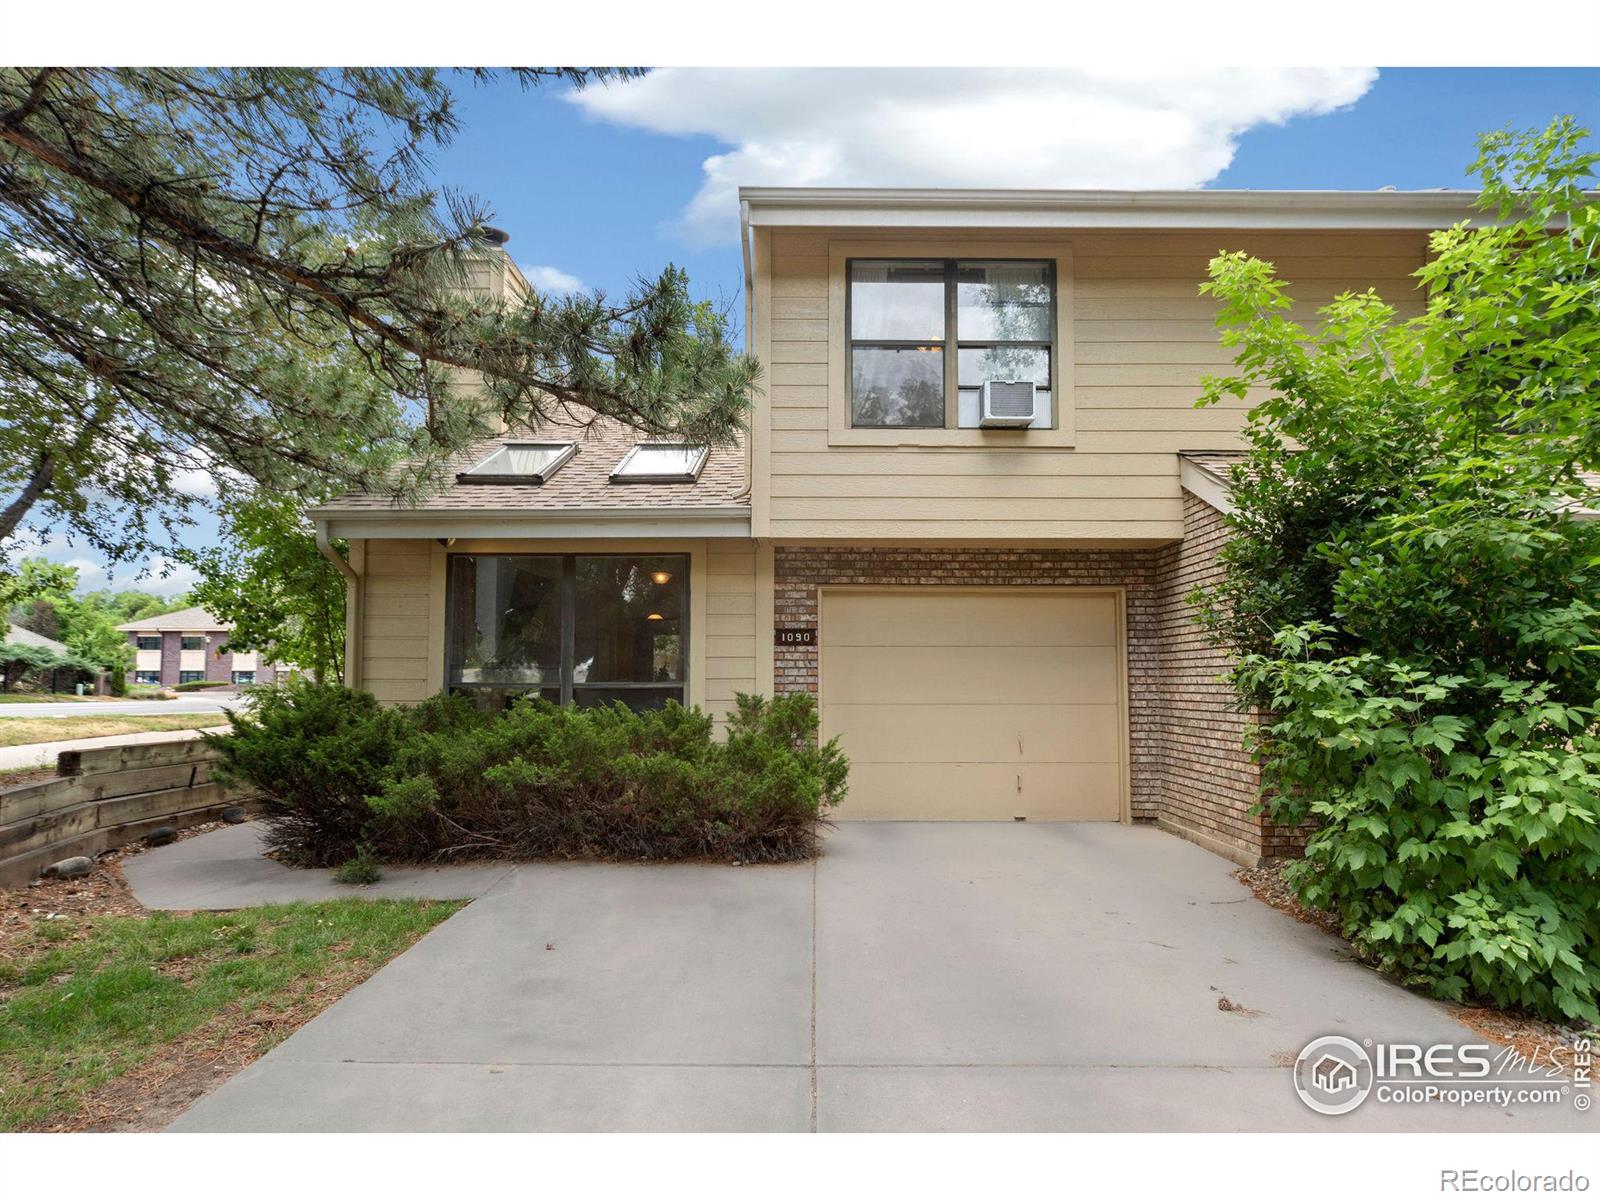 1090  Sundering Drive, fort collins MLS: 4567891015313 Beds: 2 Baths: 2 Price: $380,000